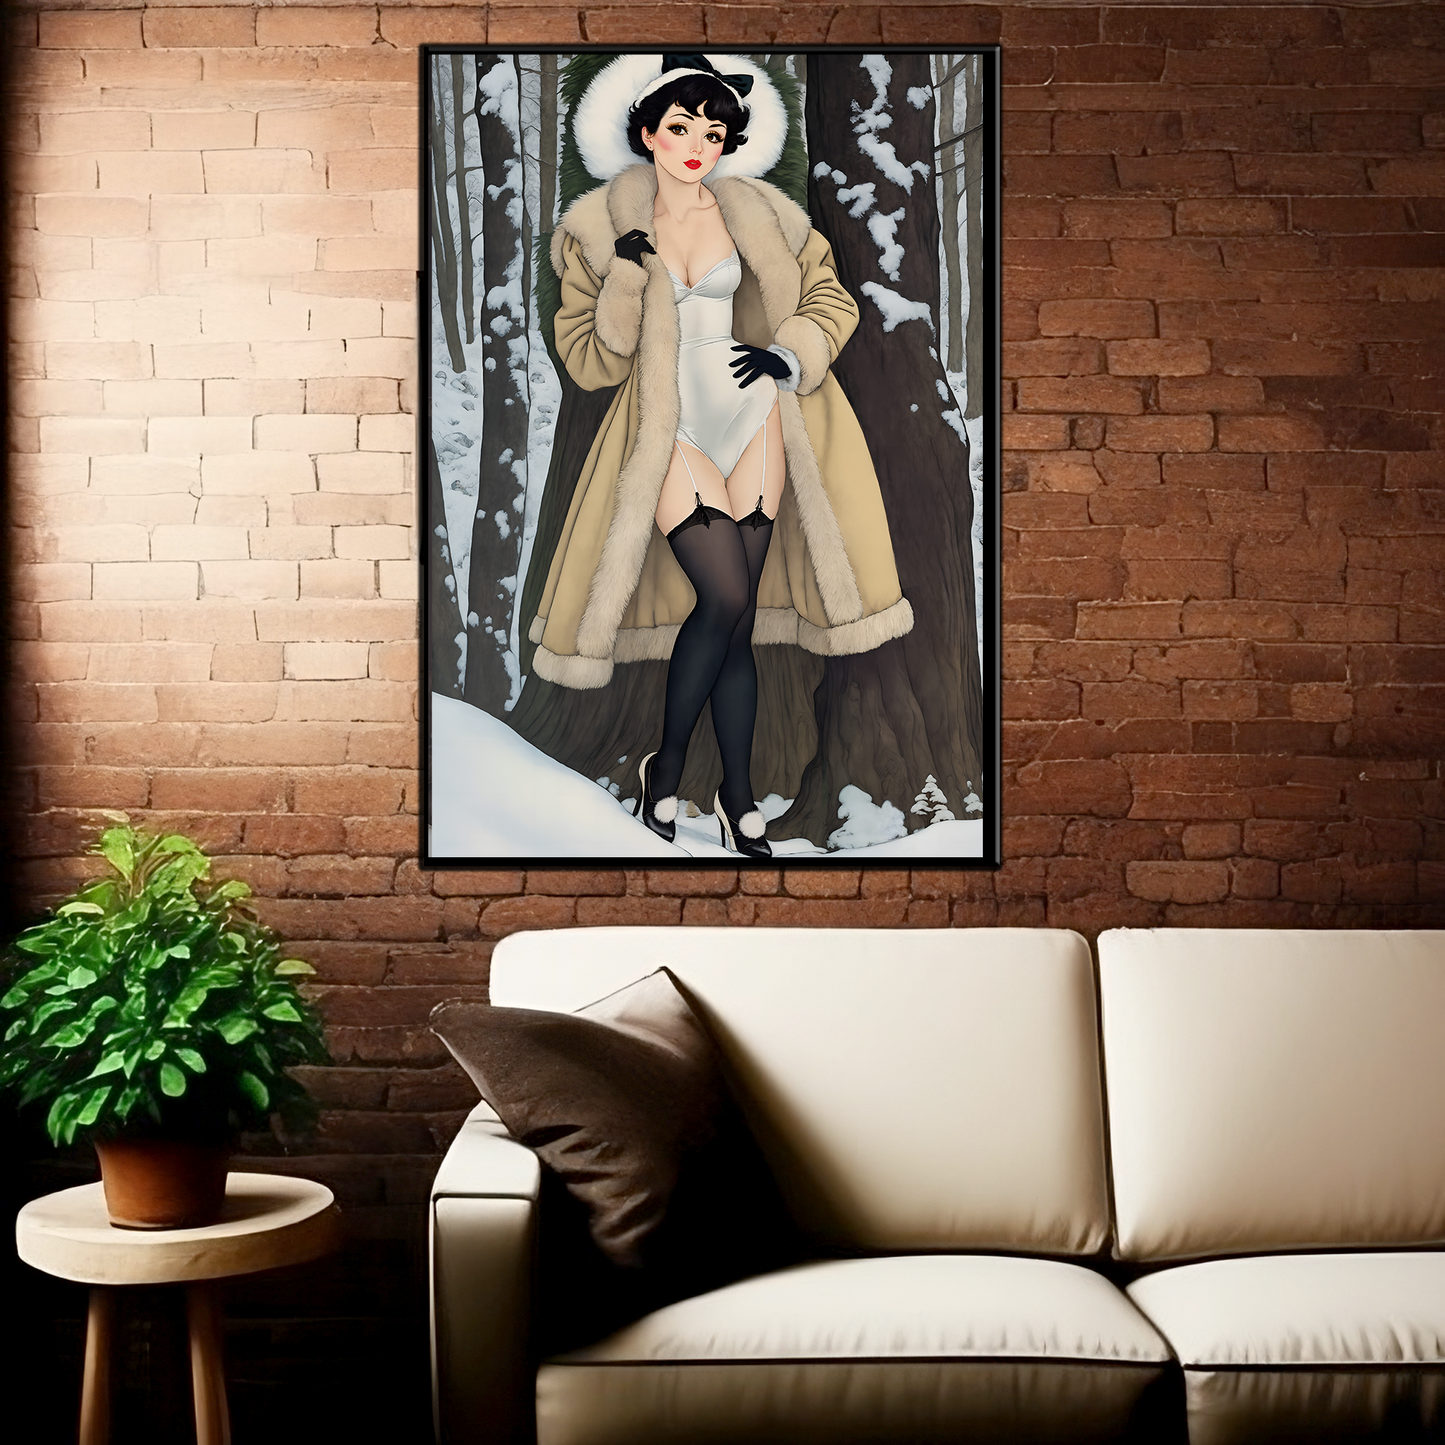 Daily Pinup #24 - Vintage Snow Bunny Wall Art